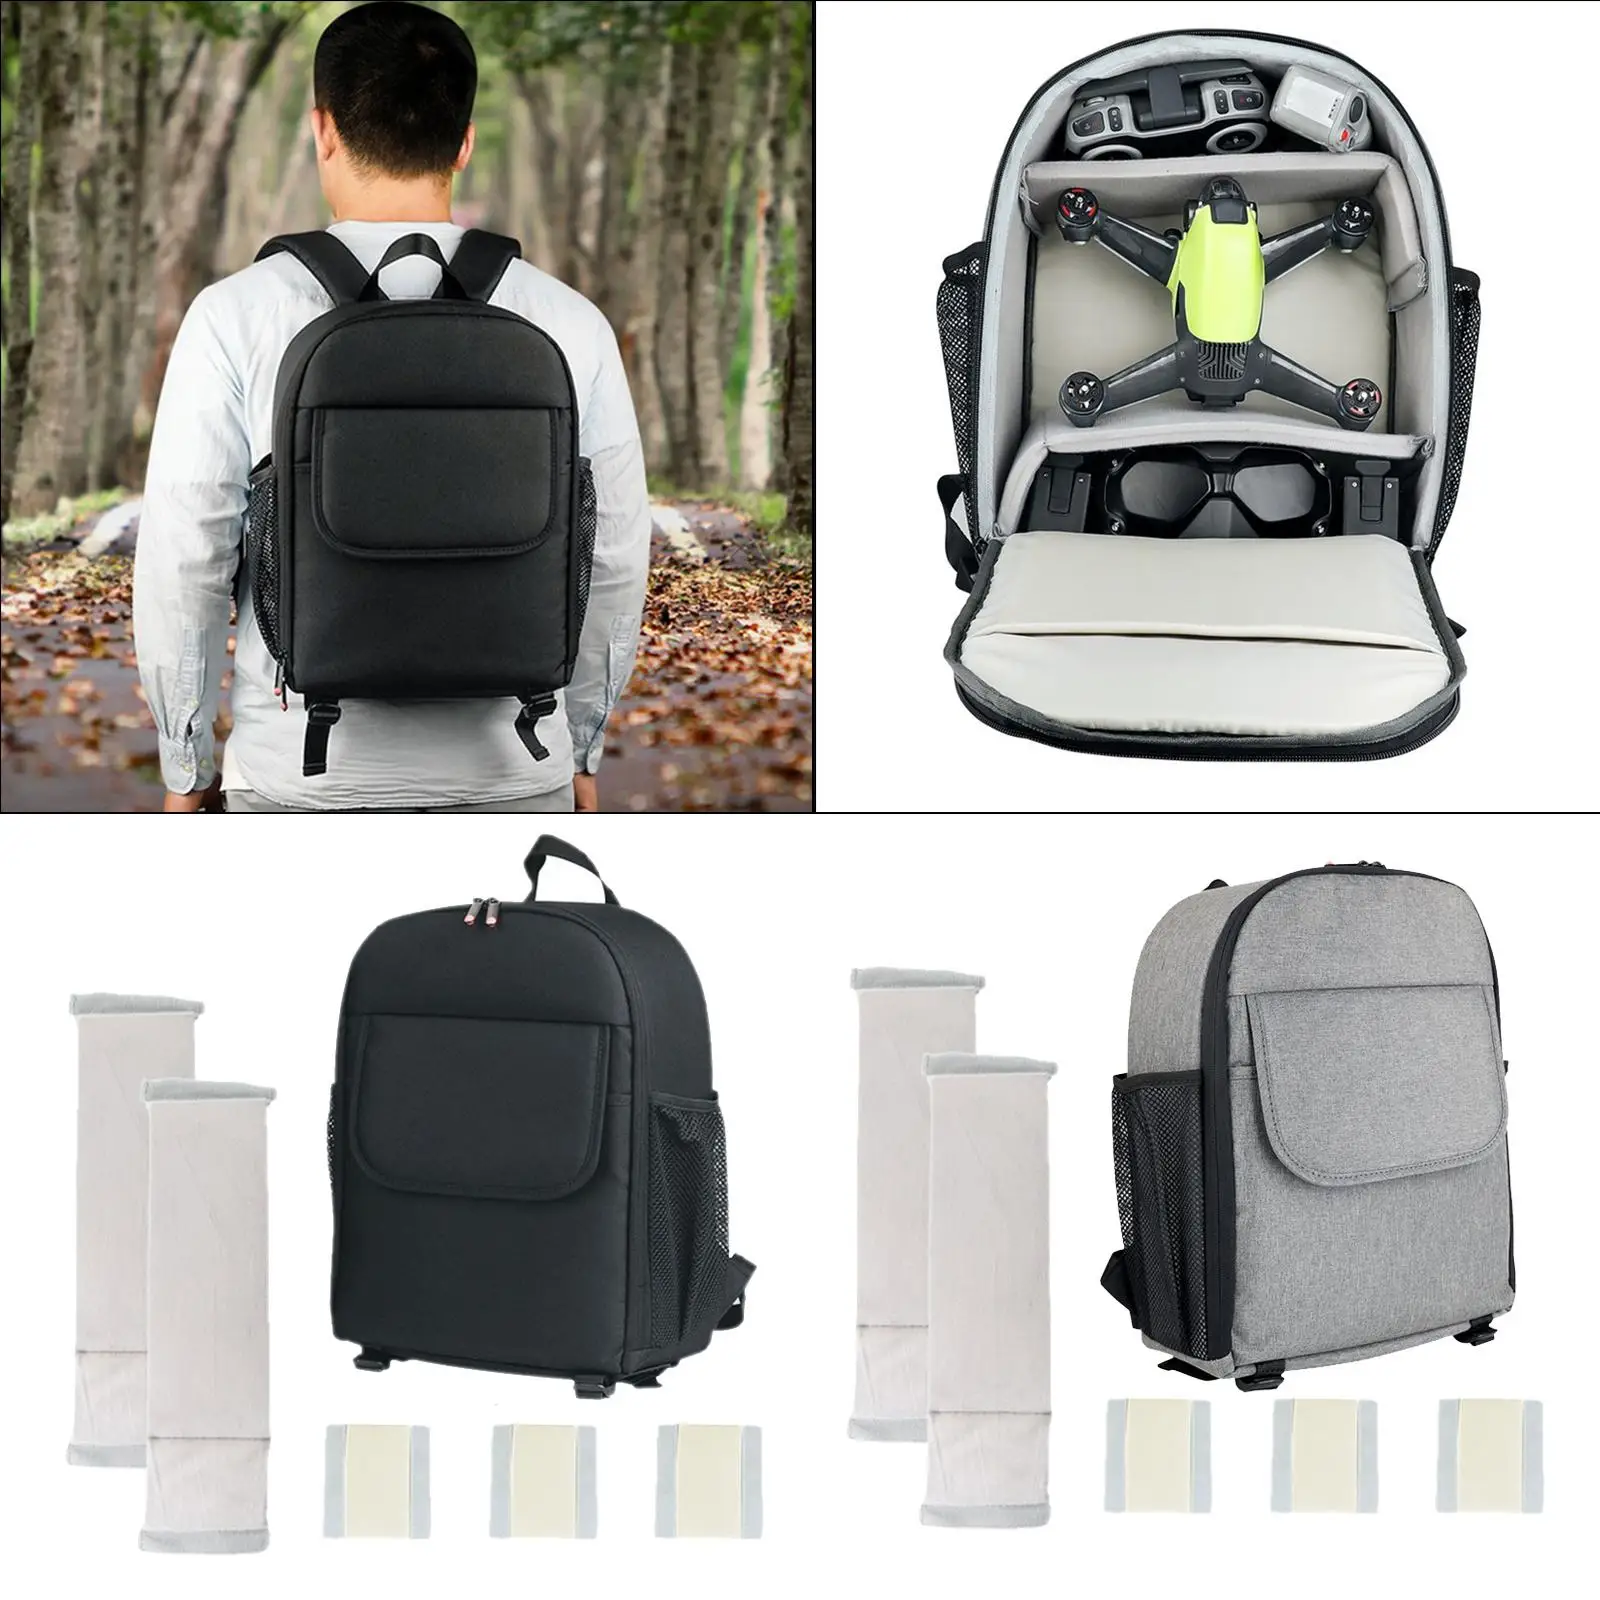 Portable Drone and Accessories Drone Organizer Inner Removable Dividers Carrying Bag Storage Bag Outdoor Carrying Case